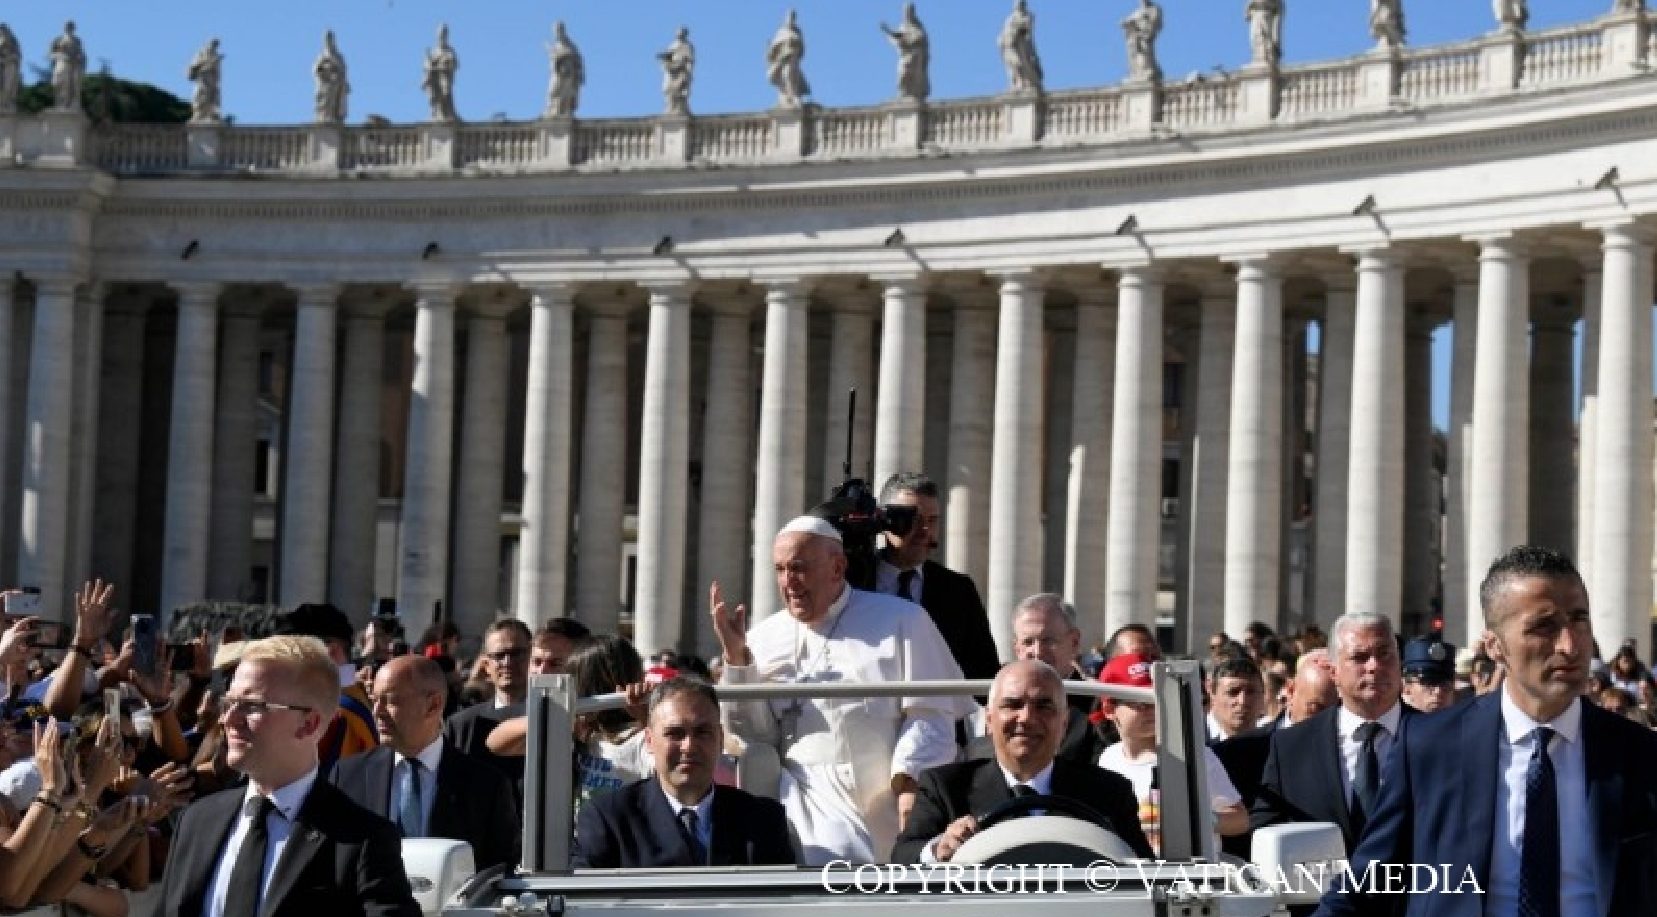 As usual, the Pope drove through the avenues of the Square in the popemobile between 8:45 and 9:00 in the morning